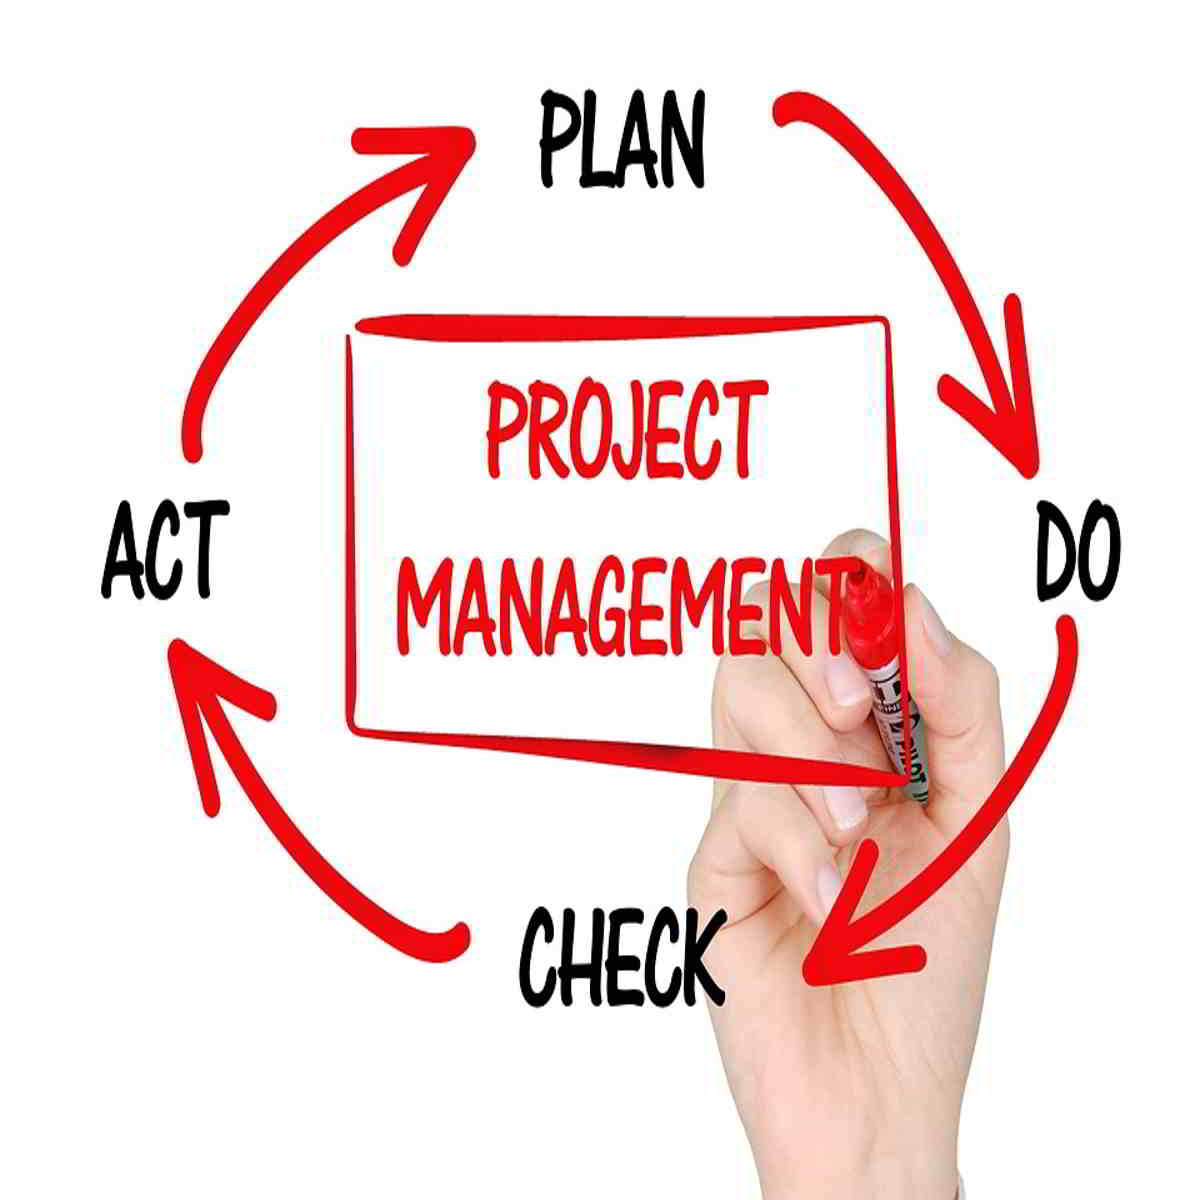 Is project management marketable in Kenya